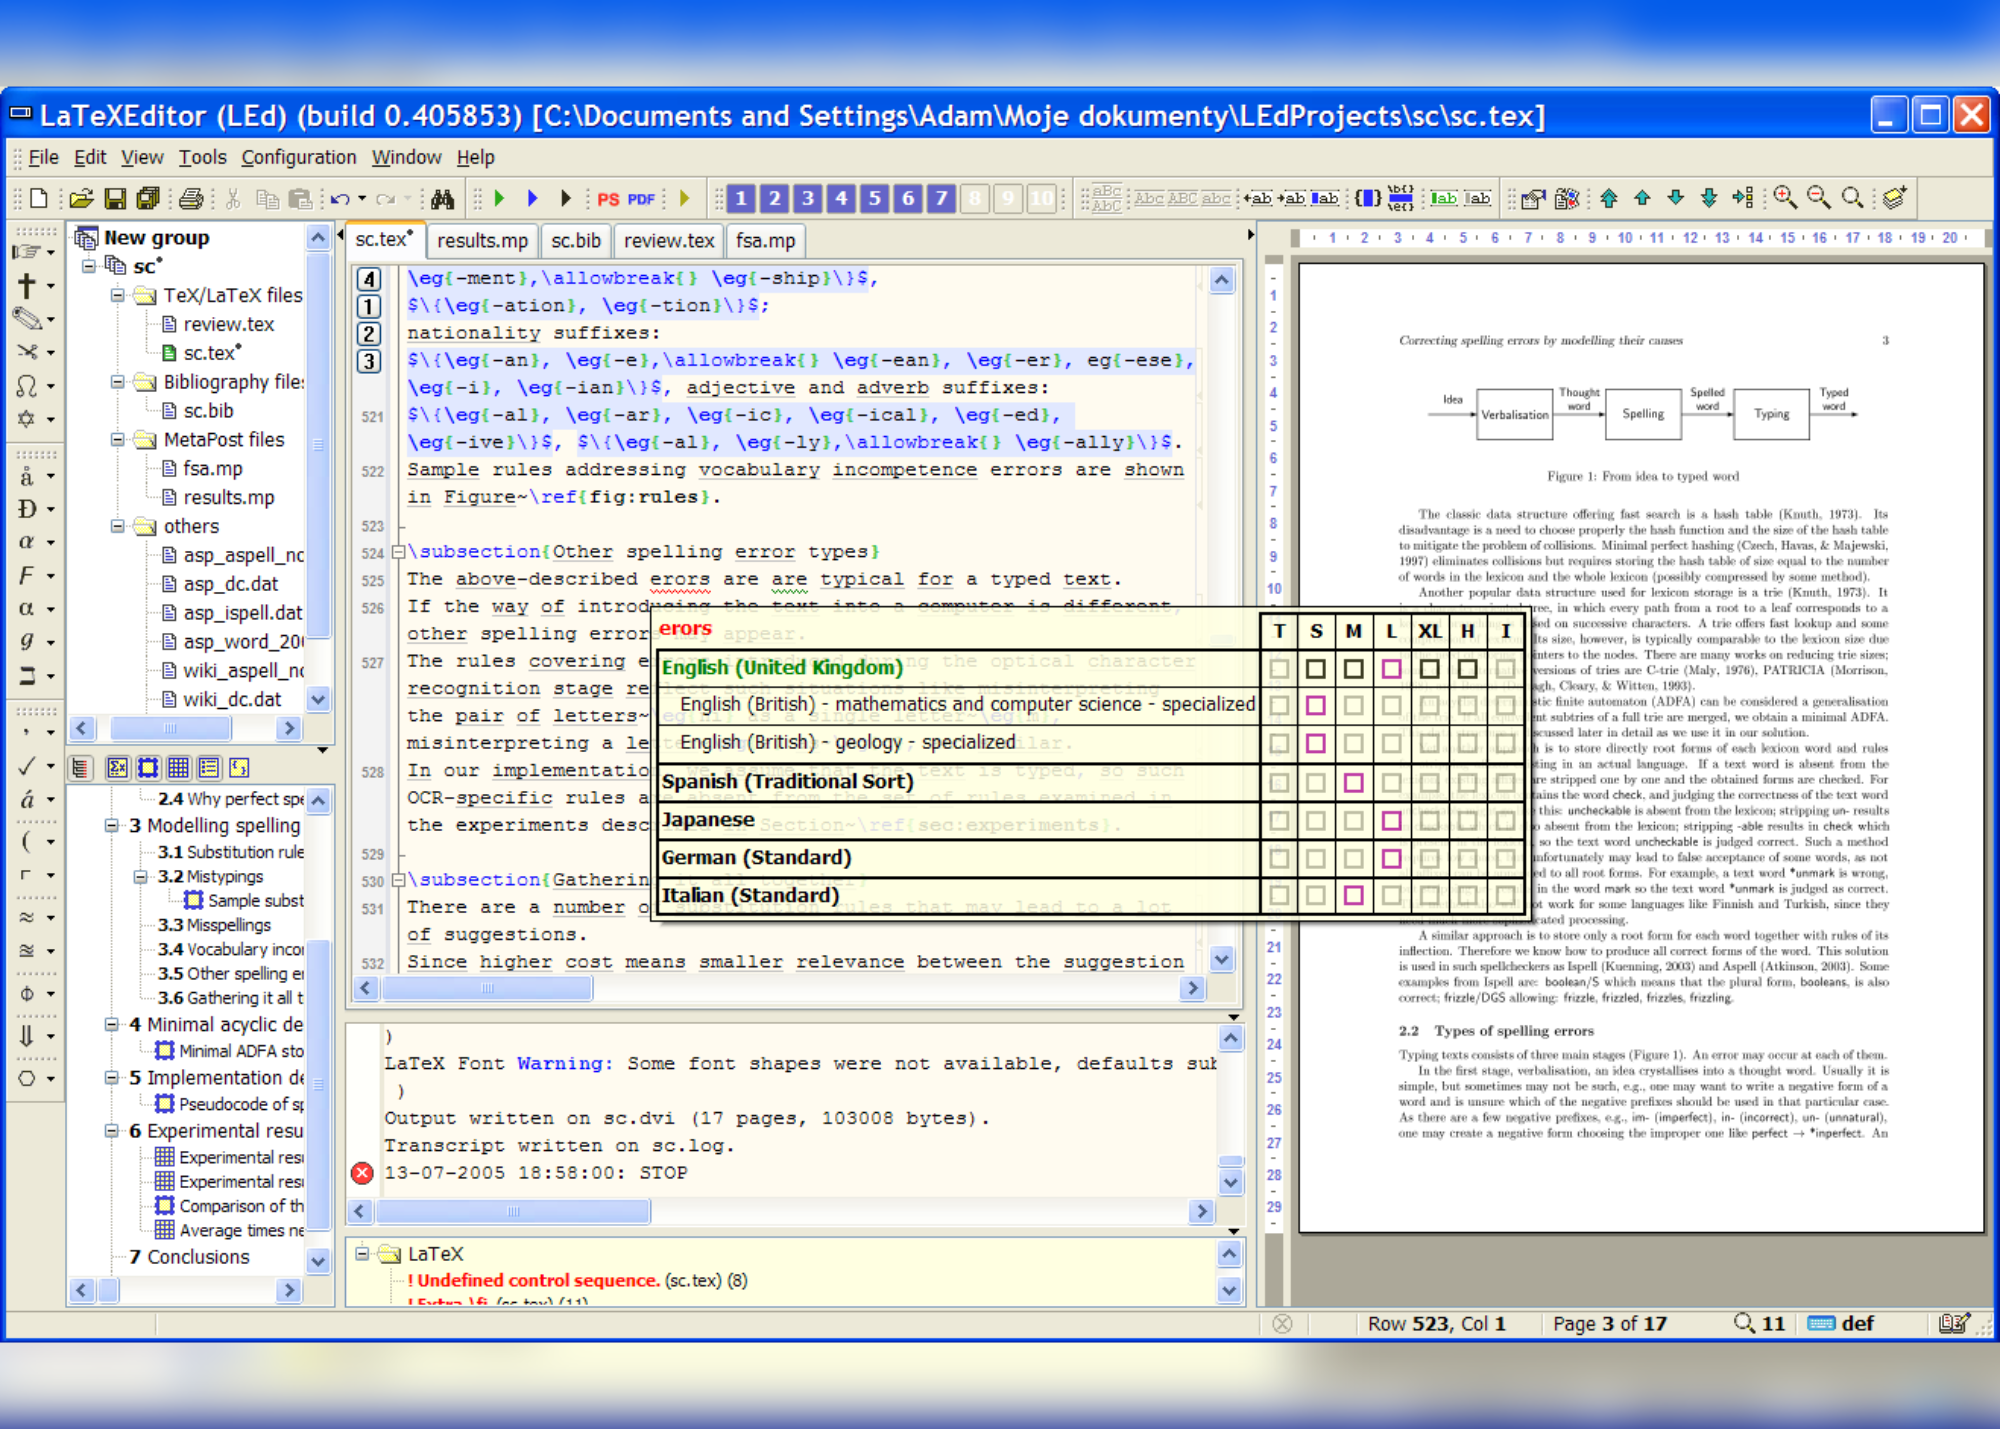 A screenshot showing spell checker feature and a small table appears from the editor